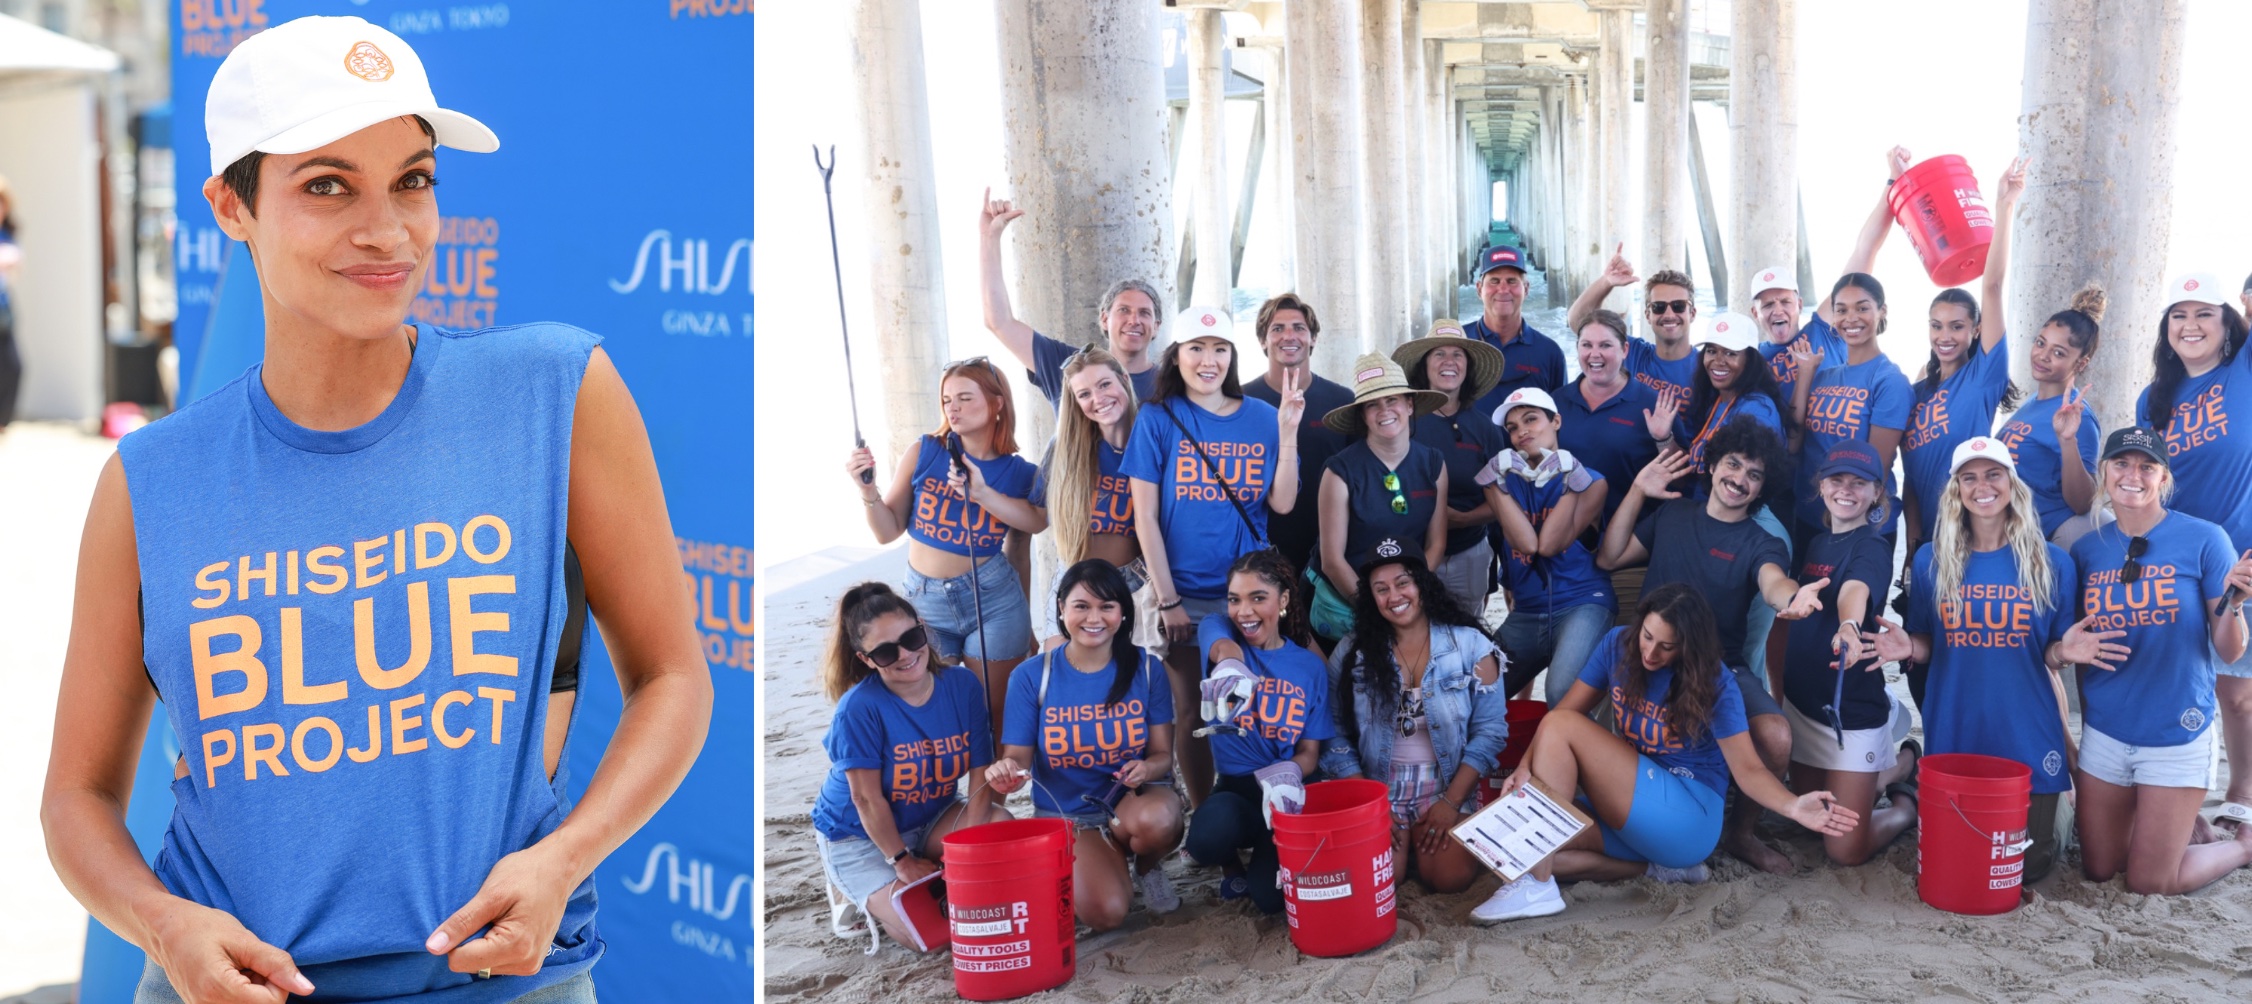 Rosario Dawson Hosts Beach Clean-Up with the SHISEIDO Blue Project, World Surf League’s One Ocean, and WILDCOAST